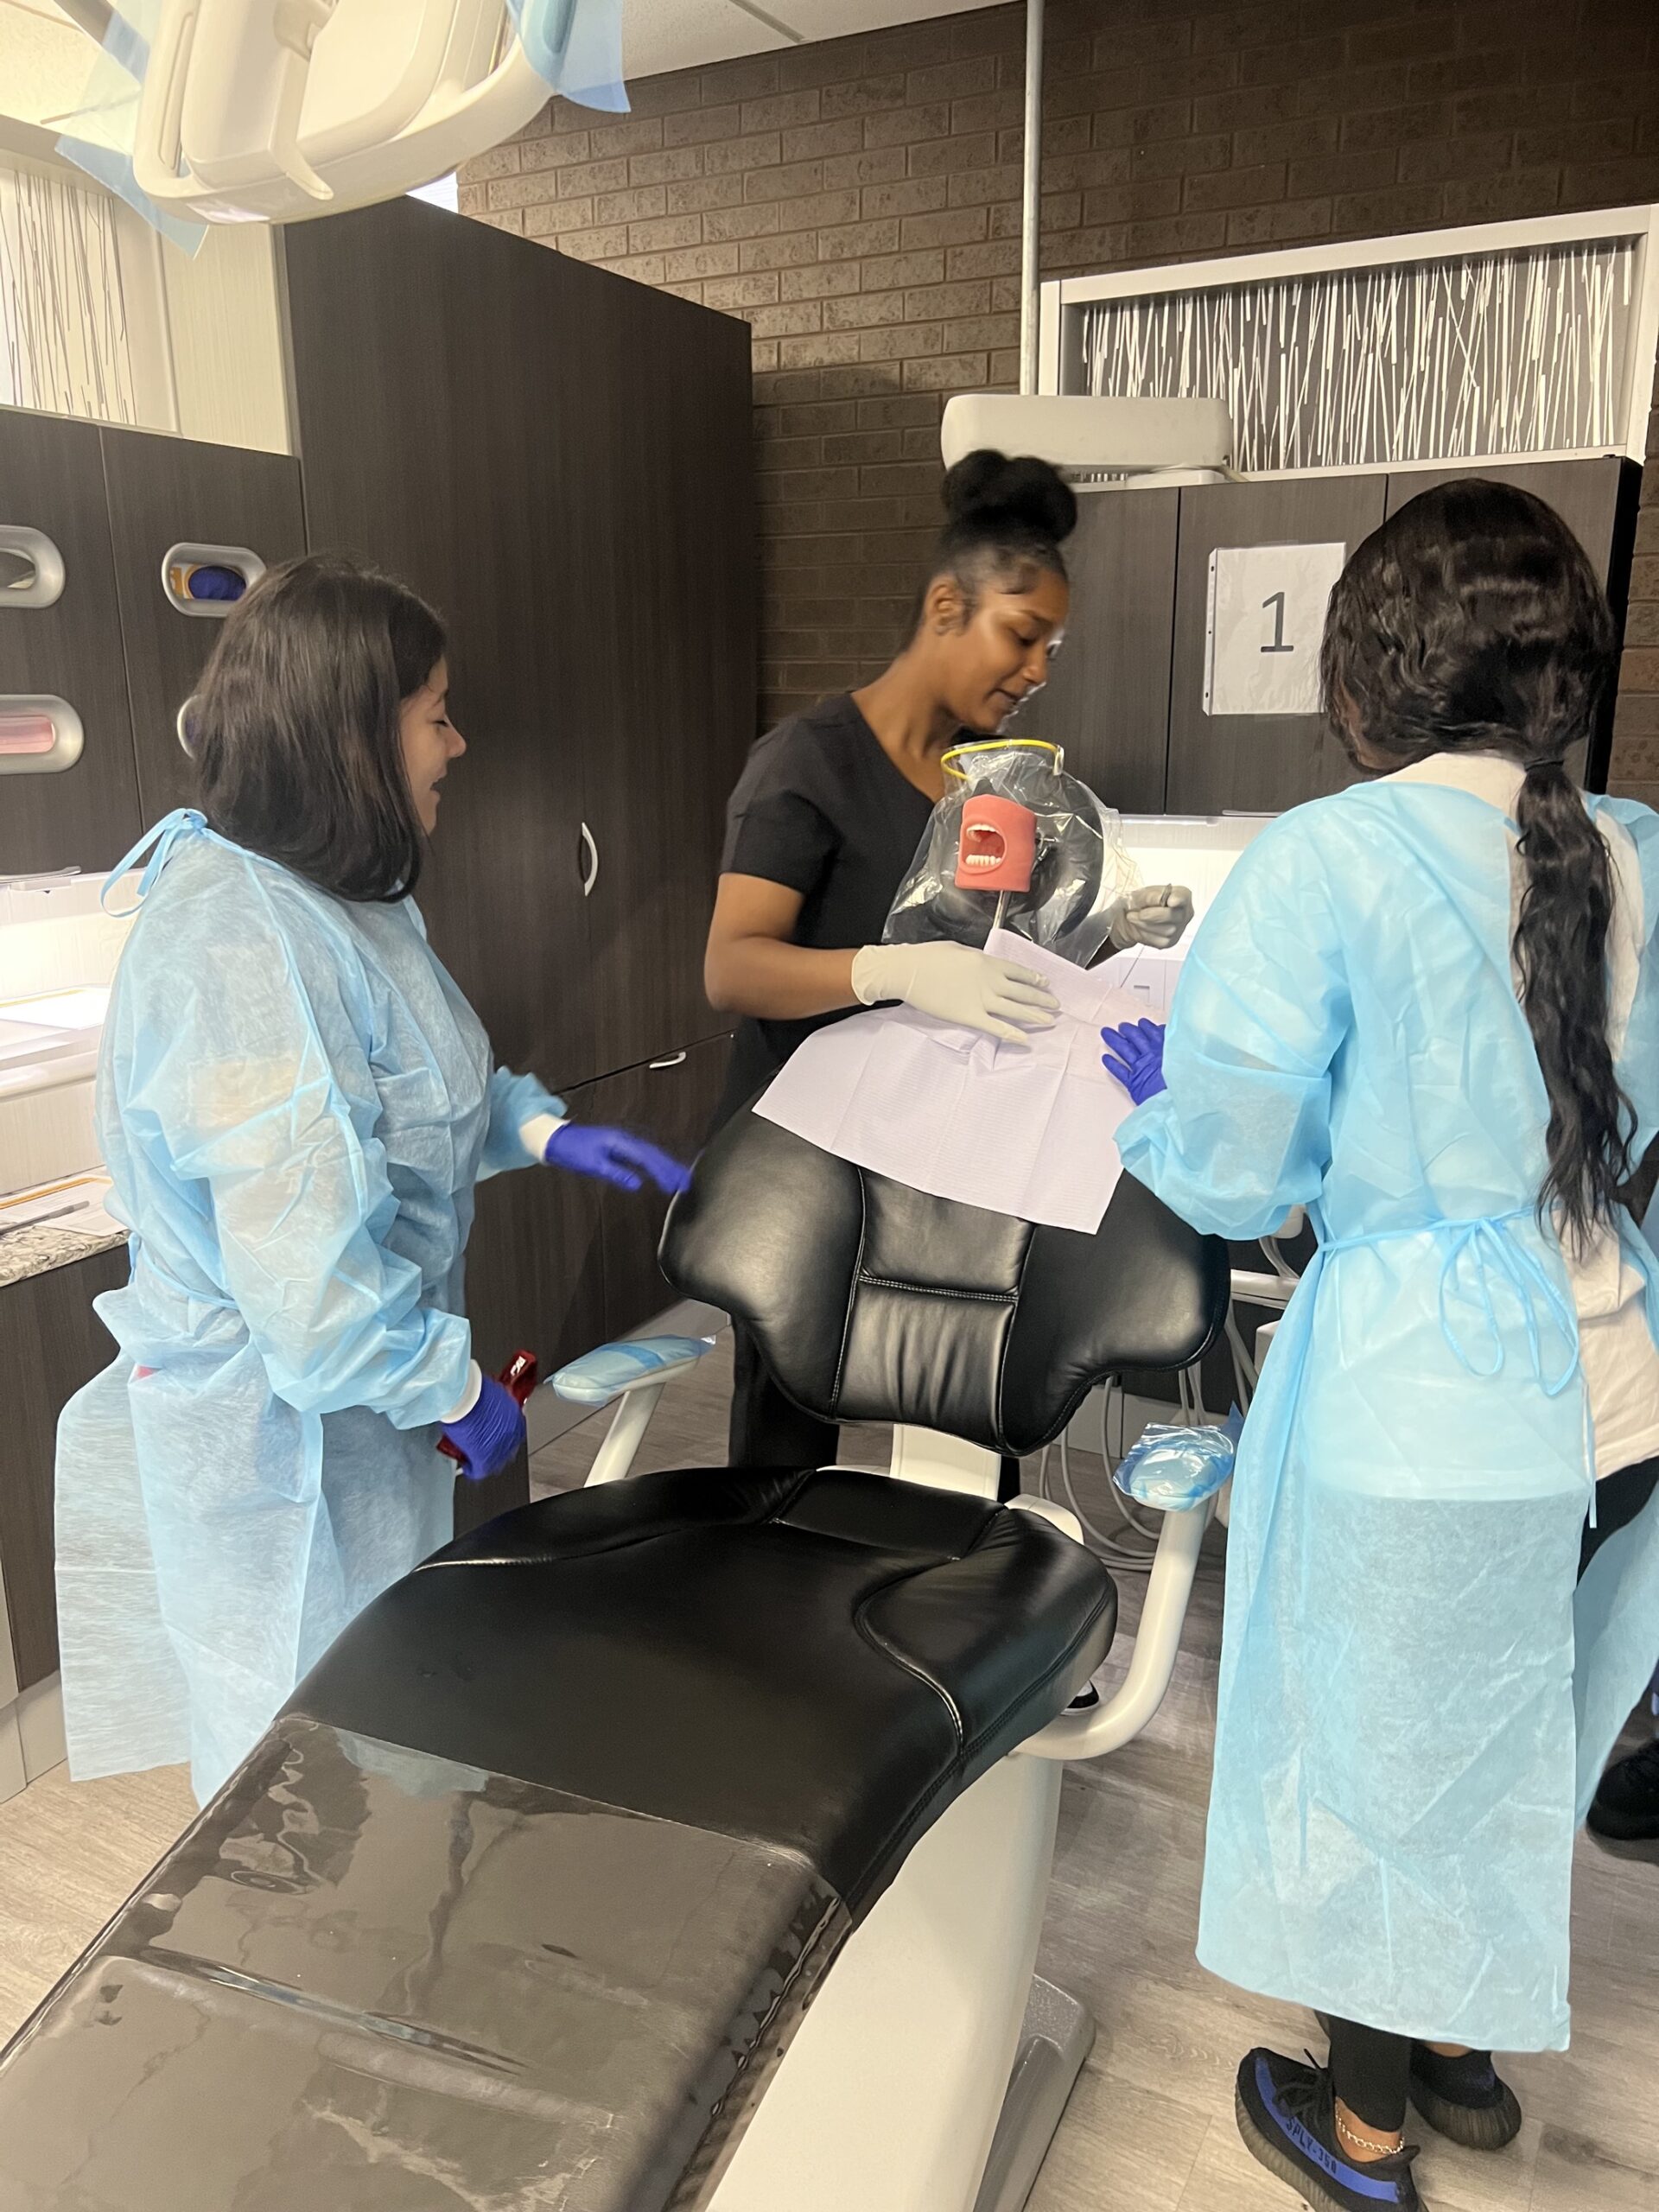 Dental assisting students in lab